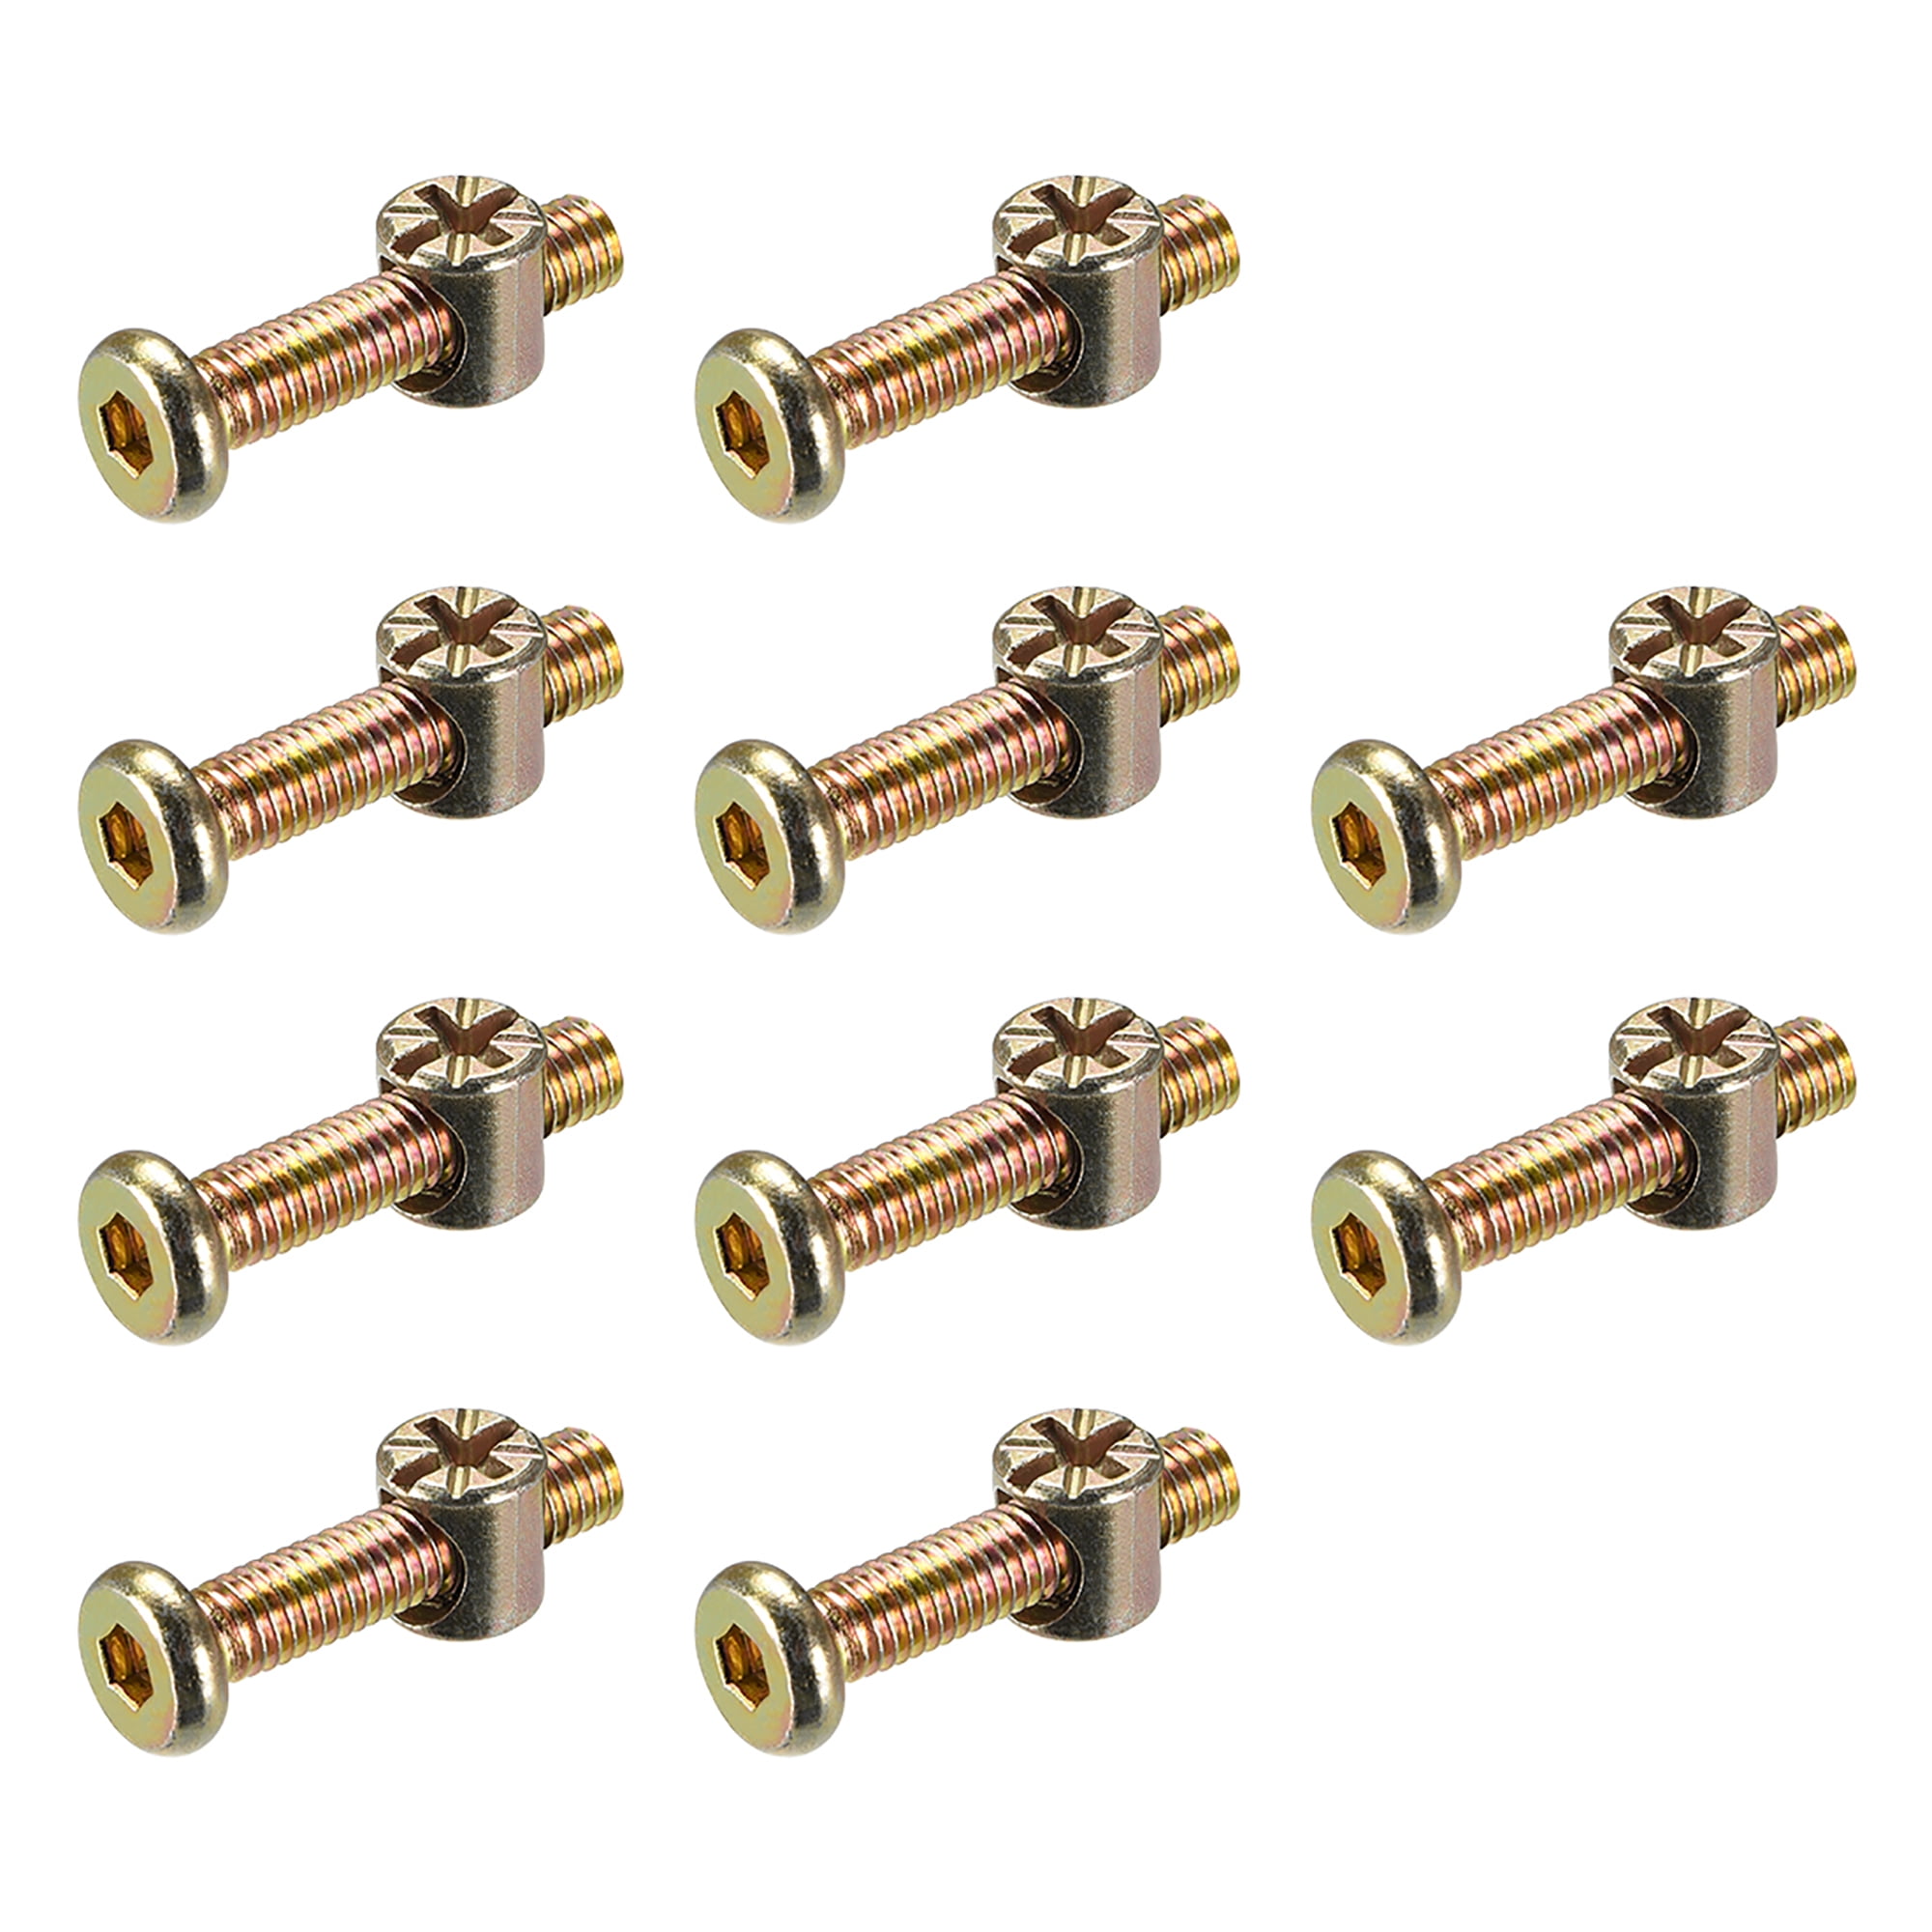 M6 15mm BRONZE JOINT CONNECTOR HEXAGON SOCKET NUTS FURNITURE BOLTS BED COT PANEL 